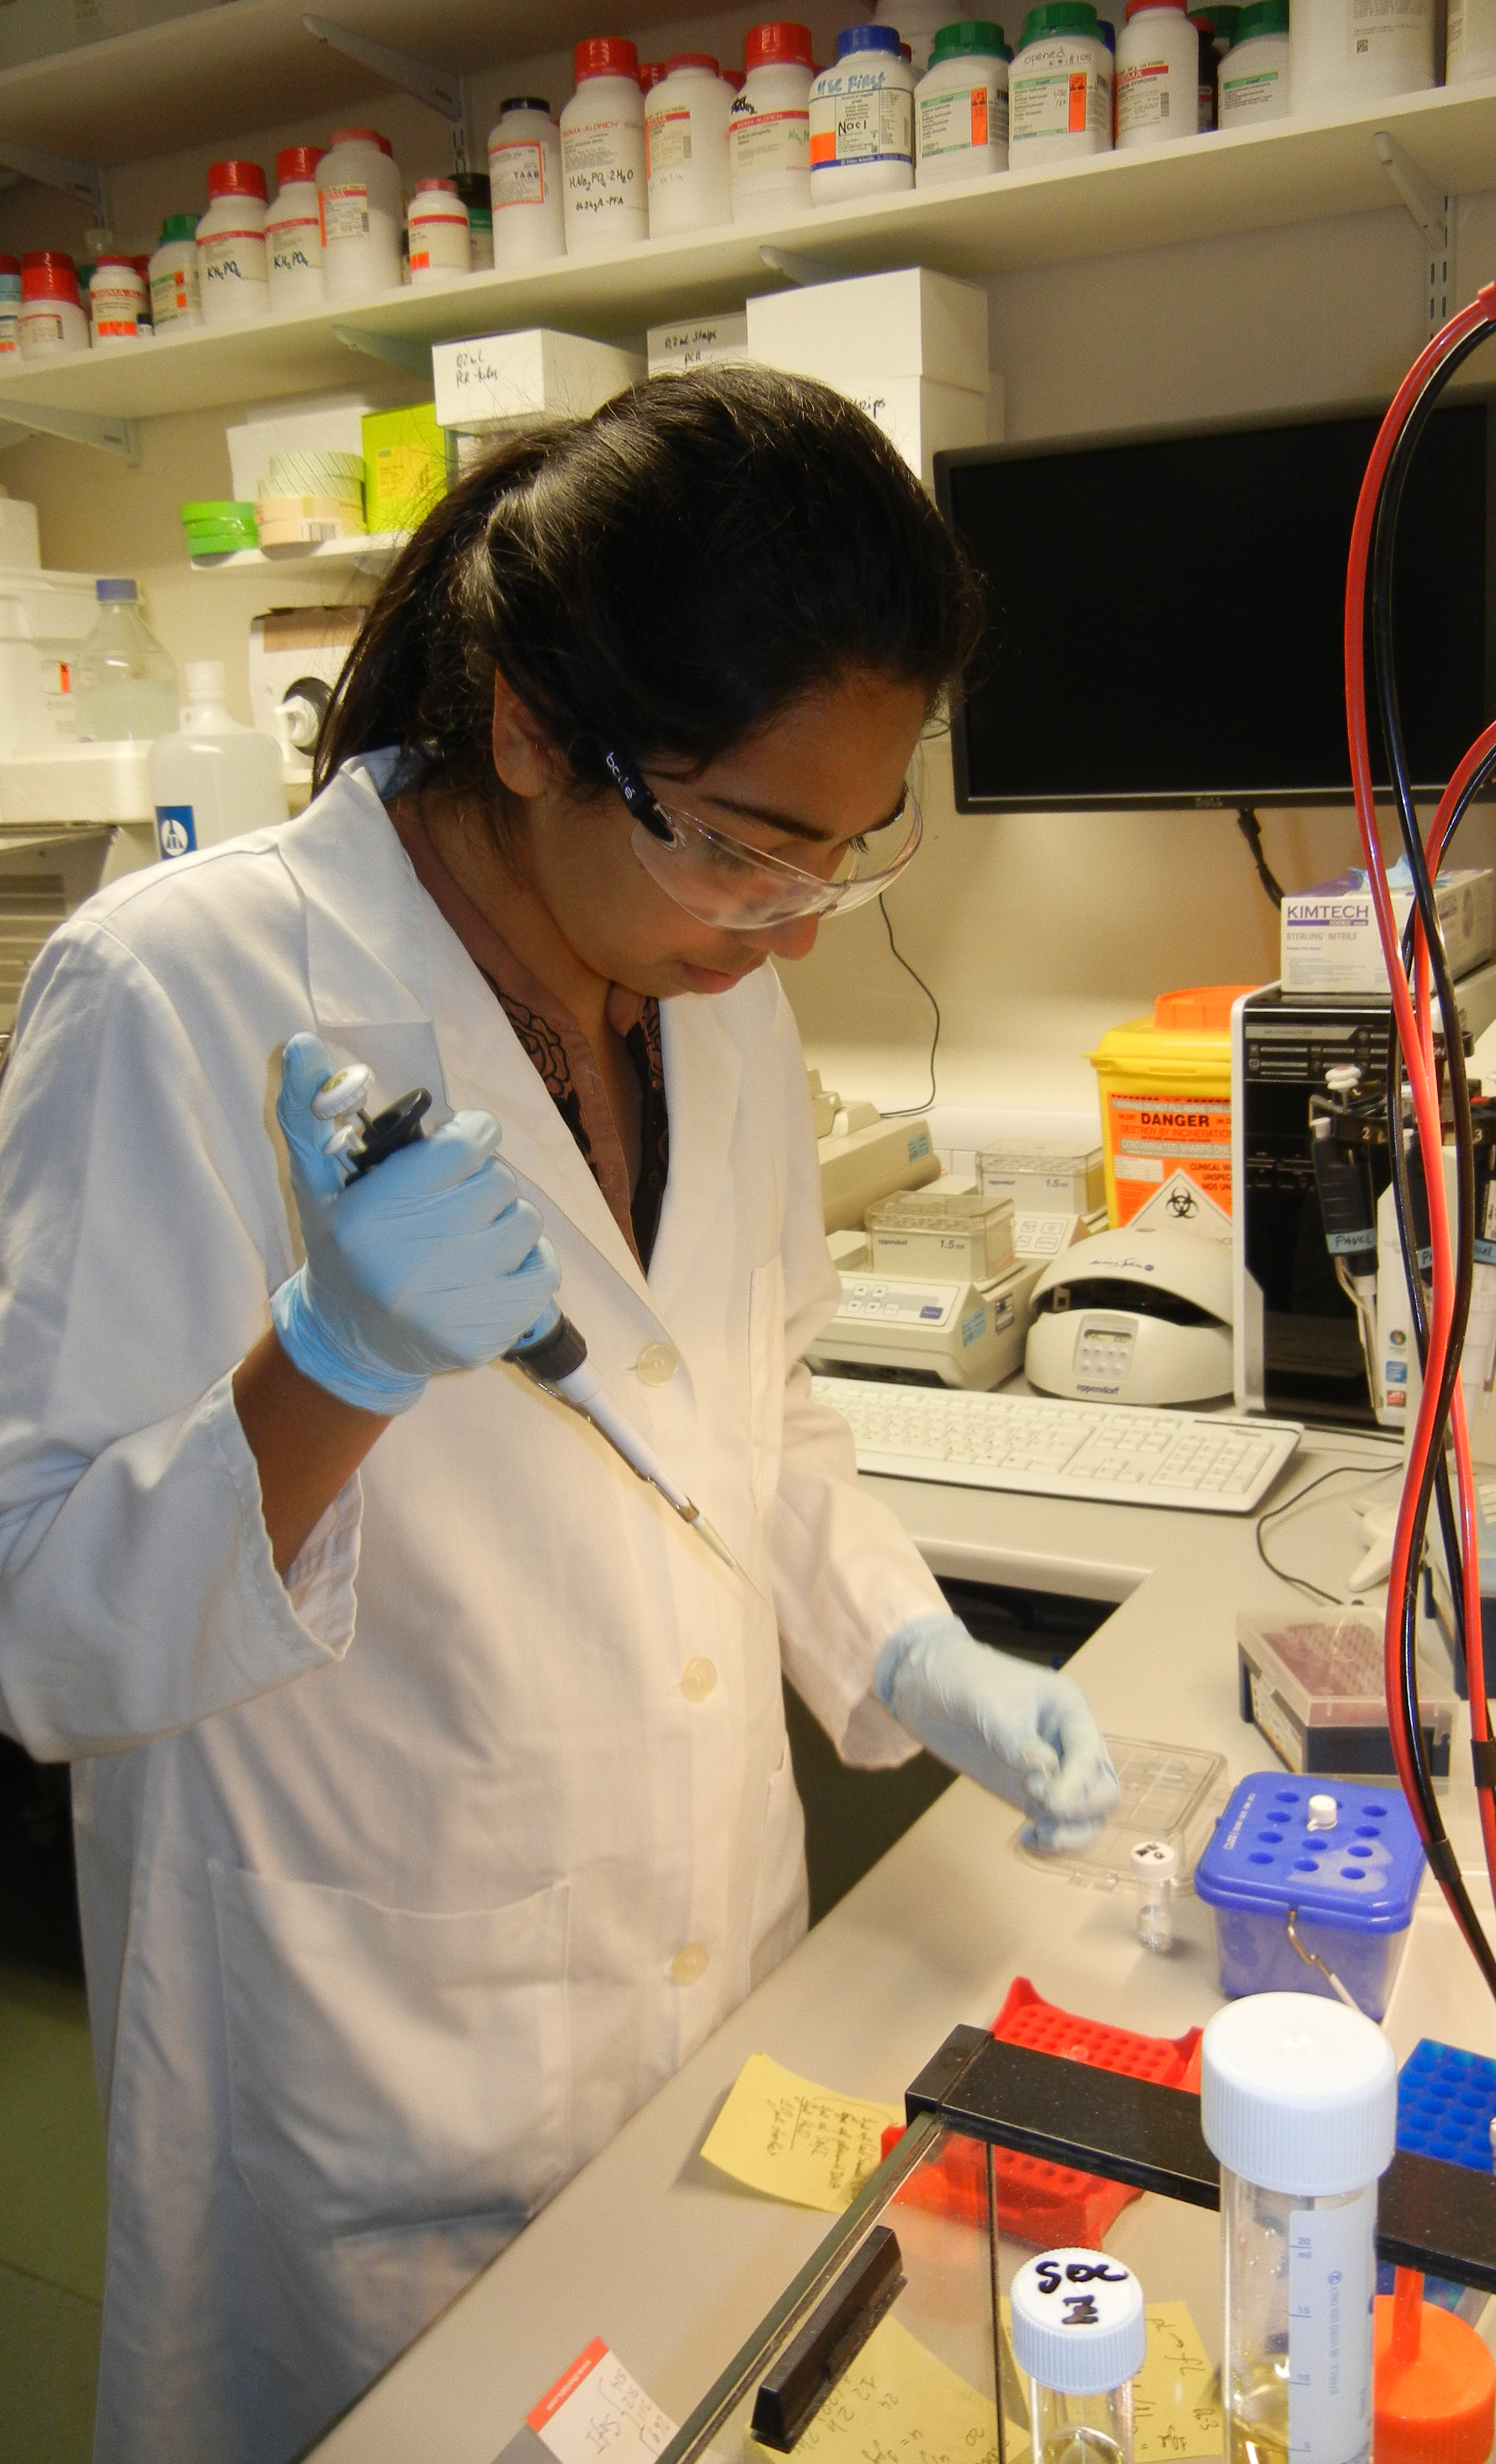 In2scienceUK student Zara working on some molecular biology experiments at the MRC BNDU.